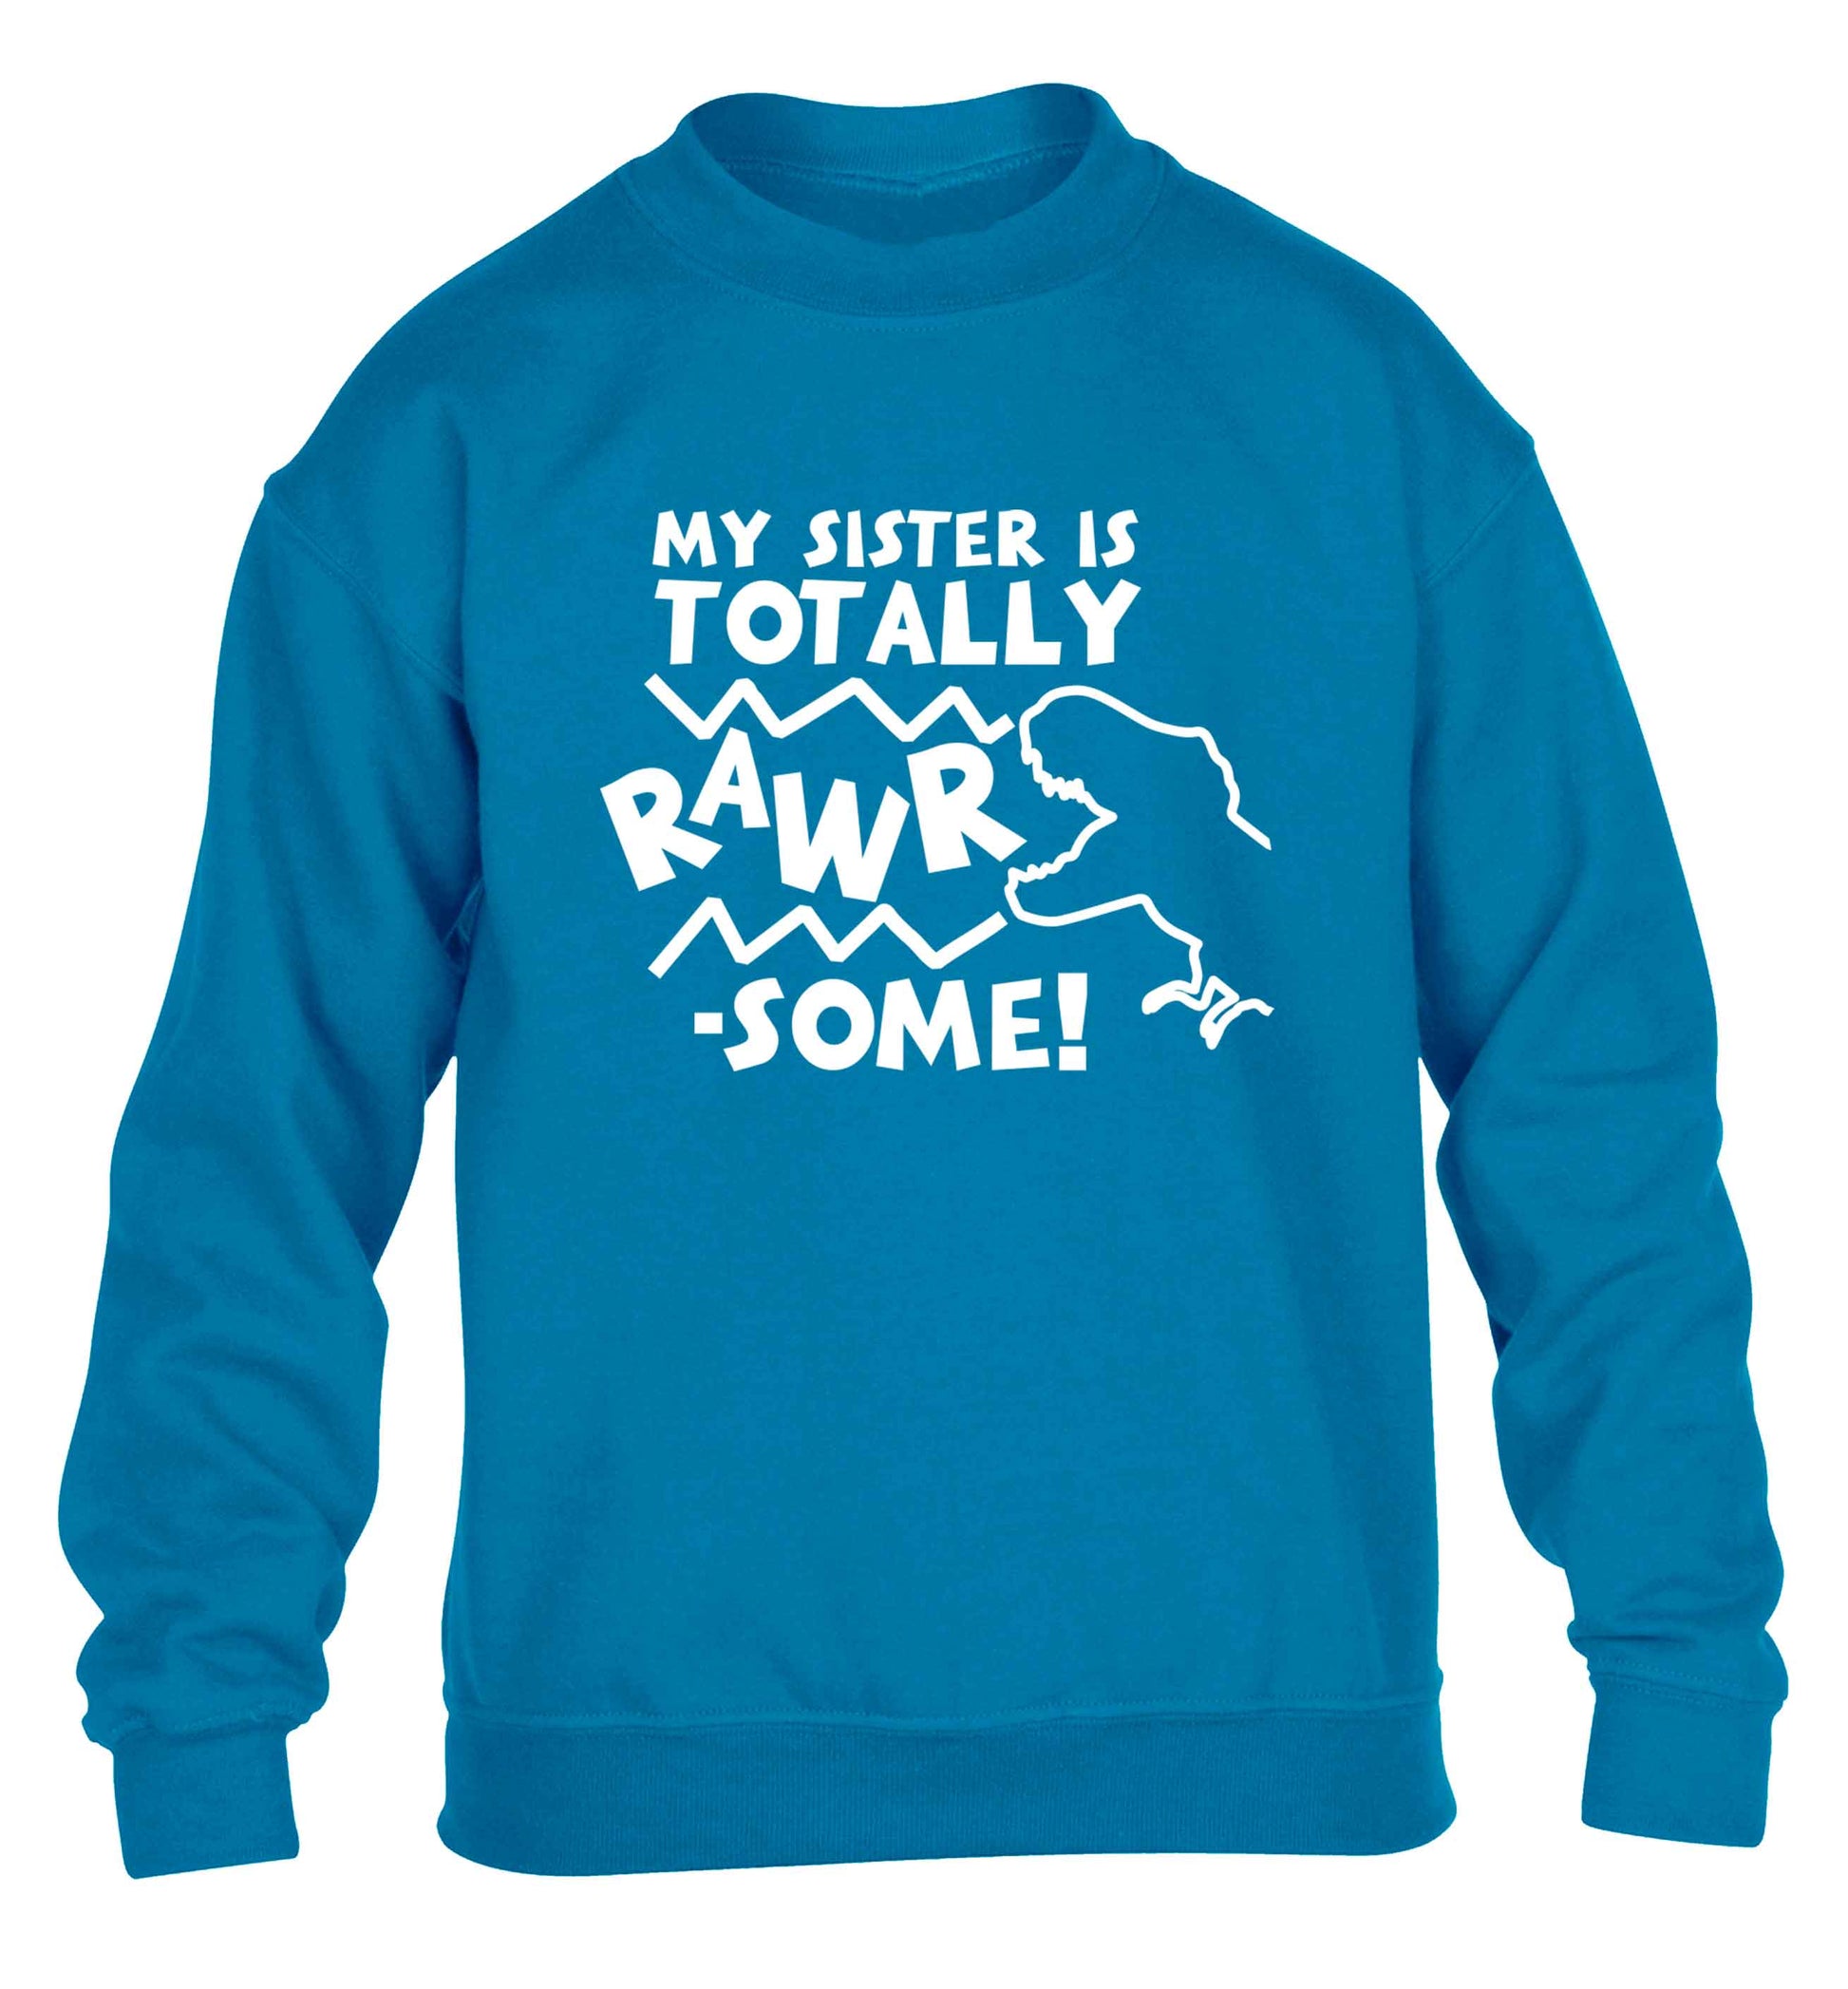 My sister is totally rawrsome children's blue sweater 12-13 Years